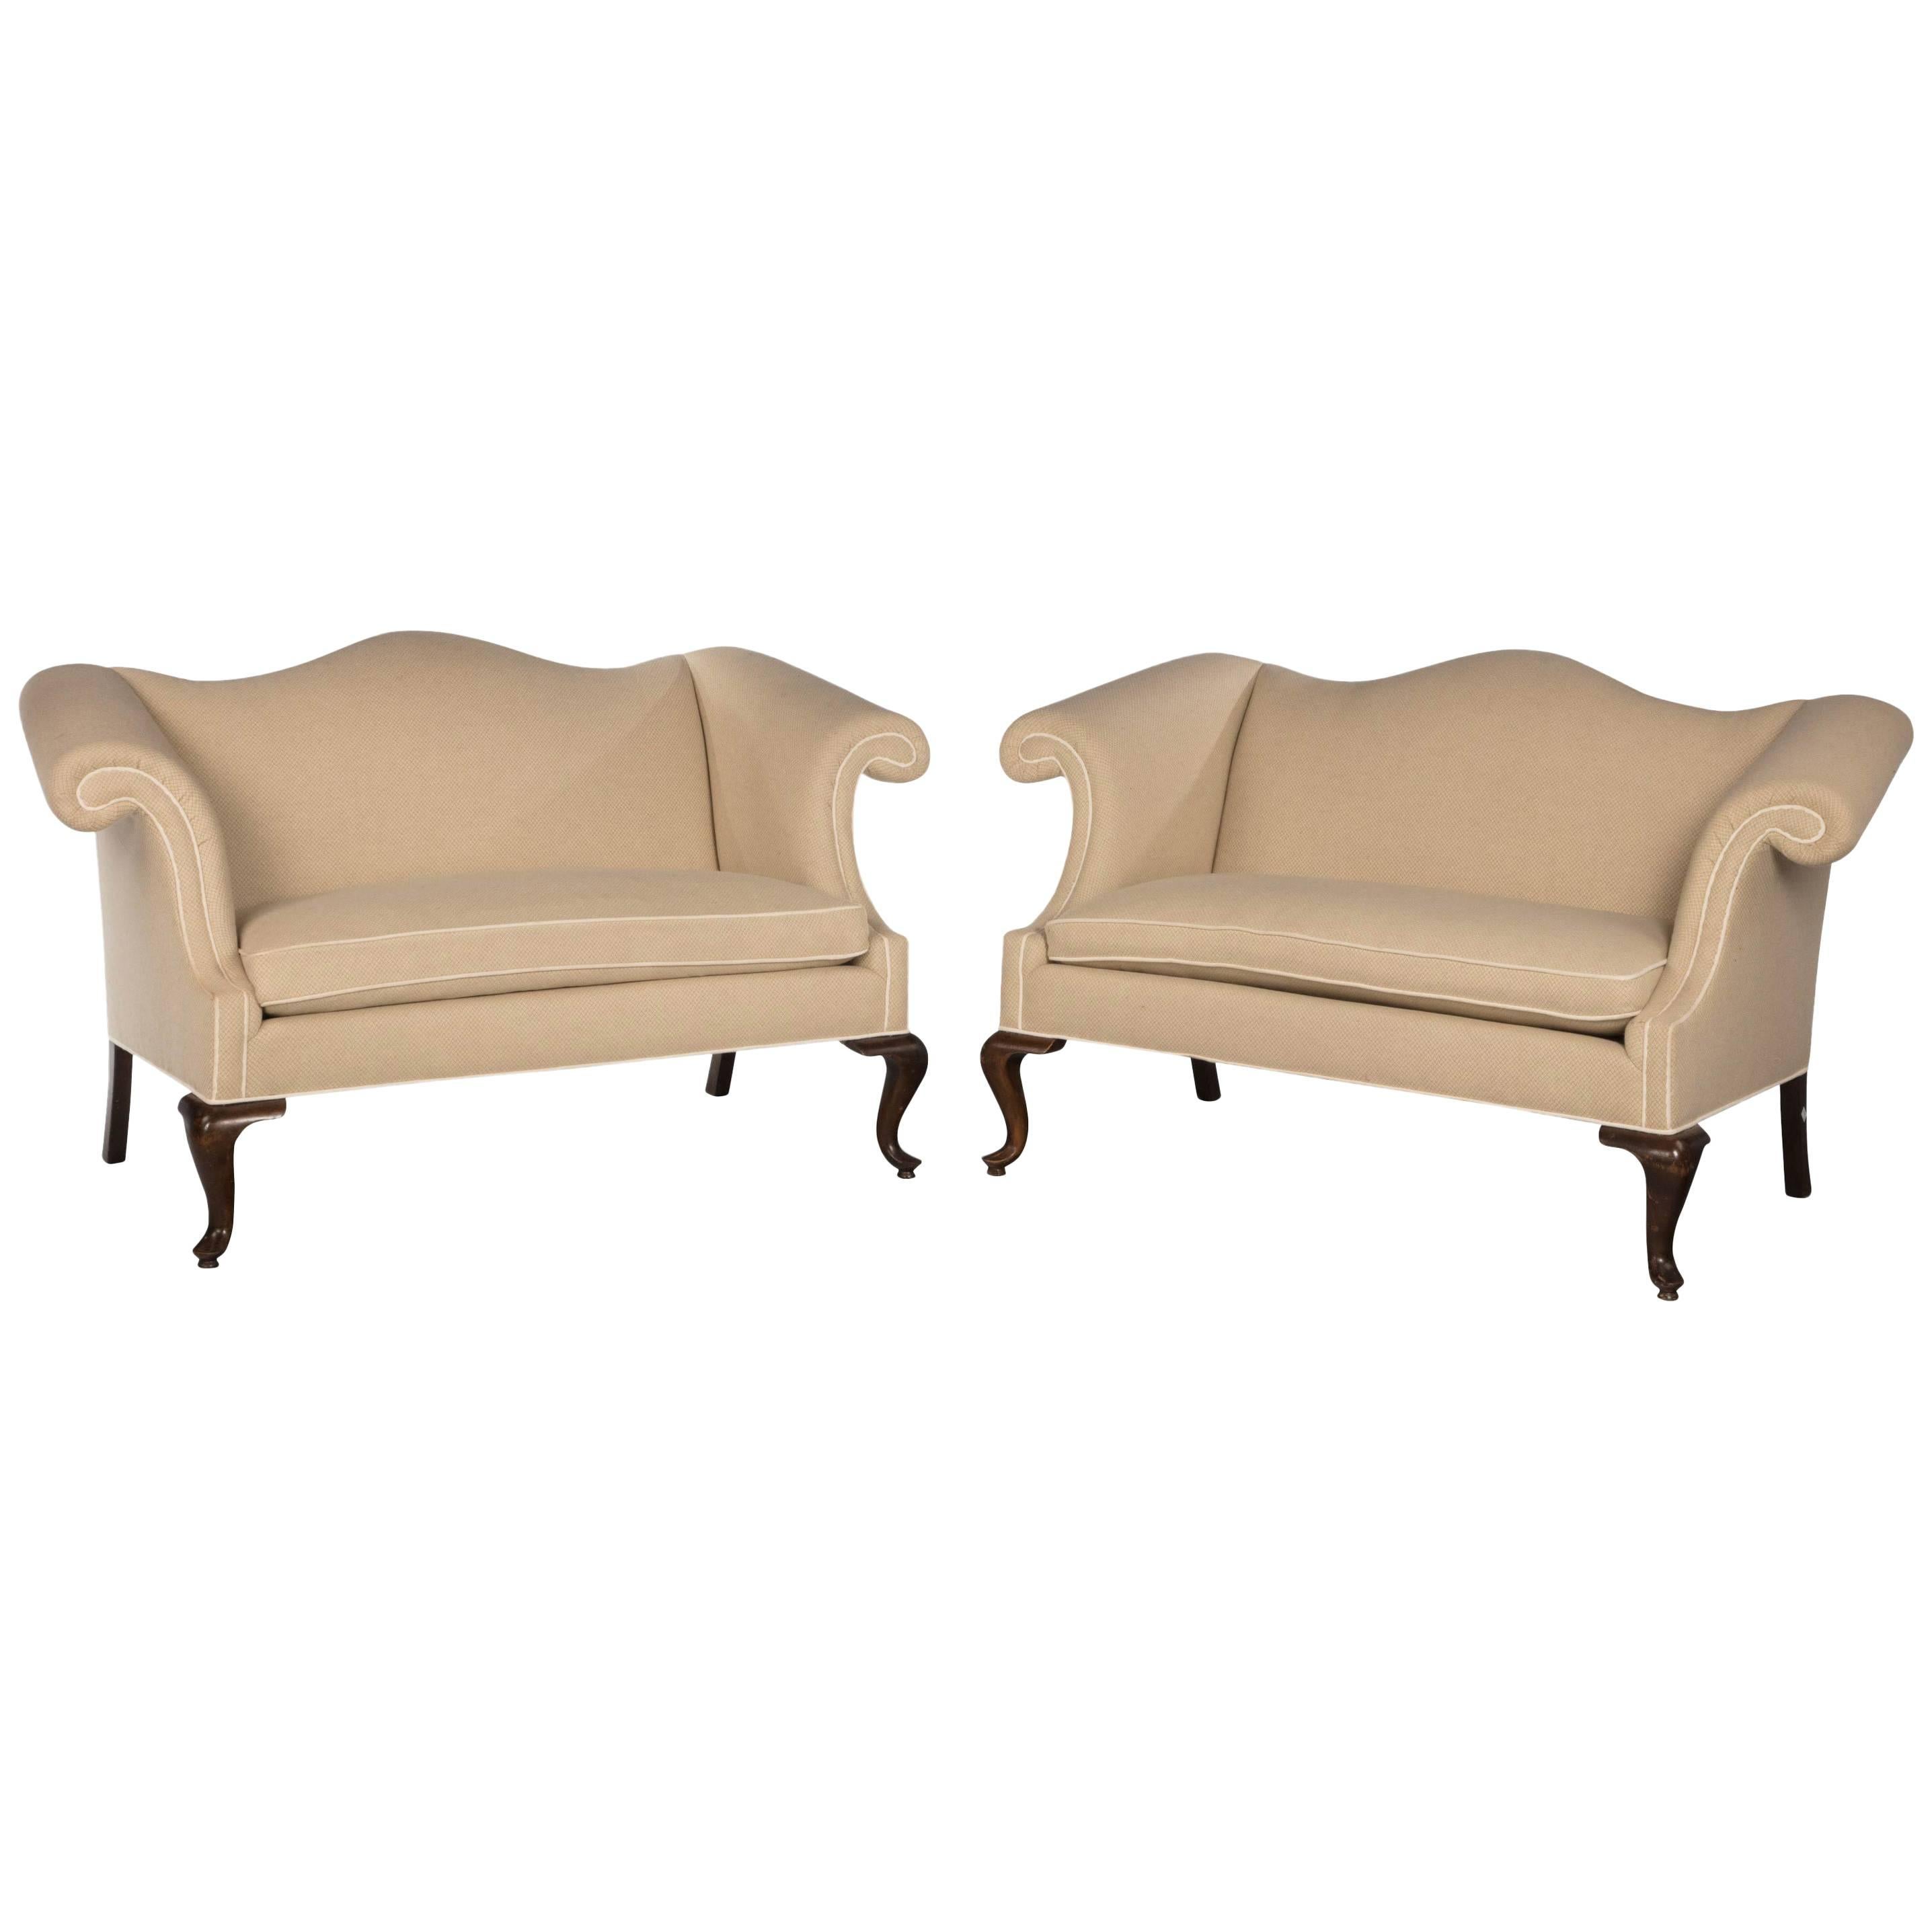 Pair of Early 20th Century Camelback Sofas of Small Proportions